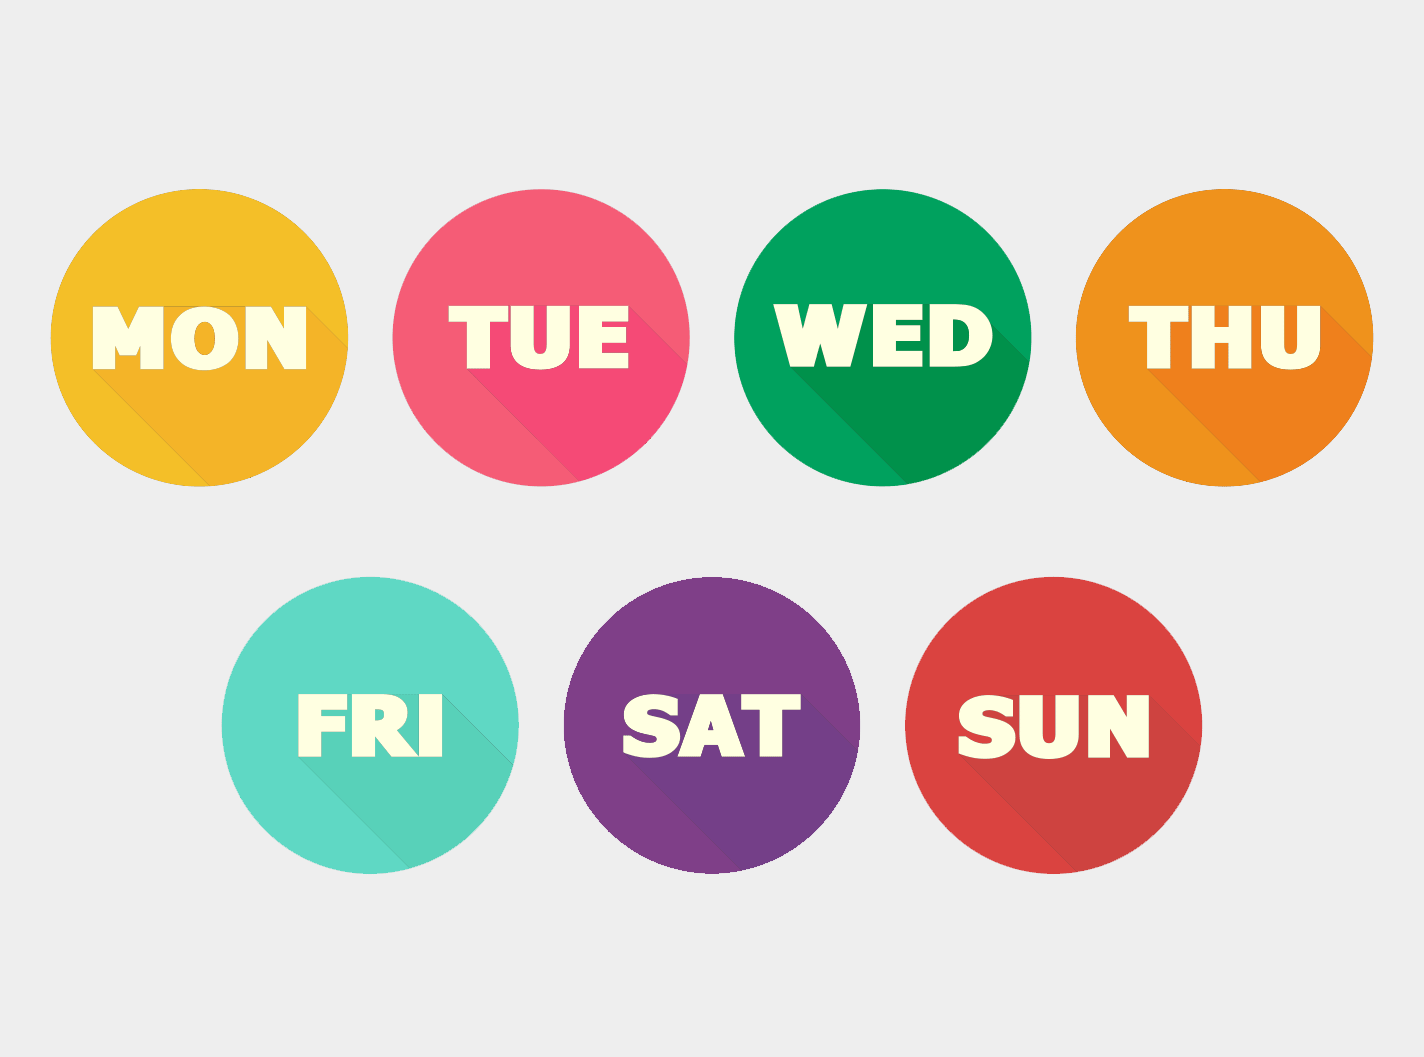 Days of the Week in French